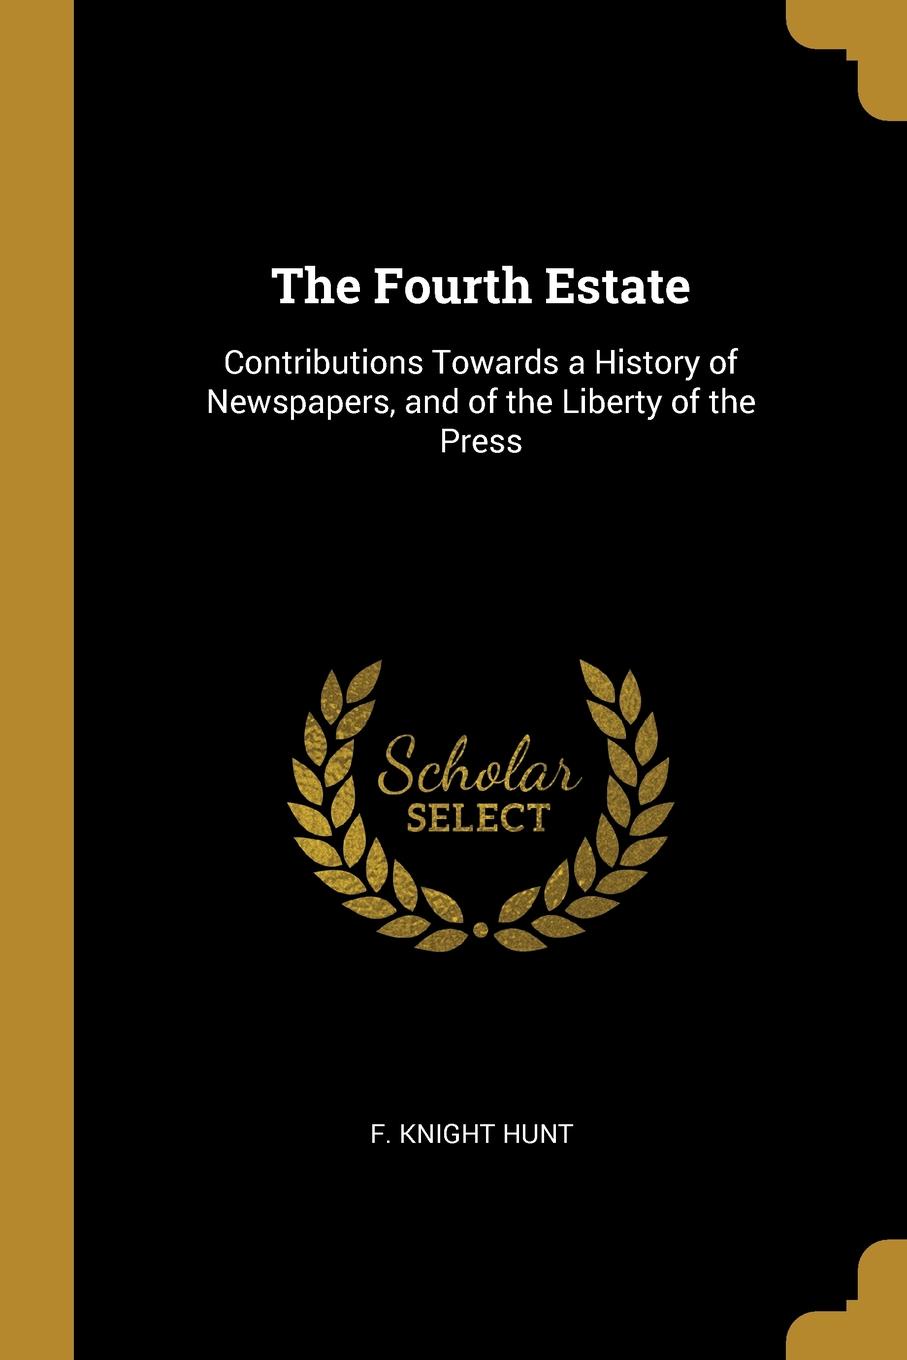 The Fourth Estate. Contributions Towards a History of Newspapers, and of the Liberty of the Press